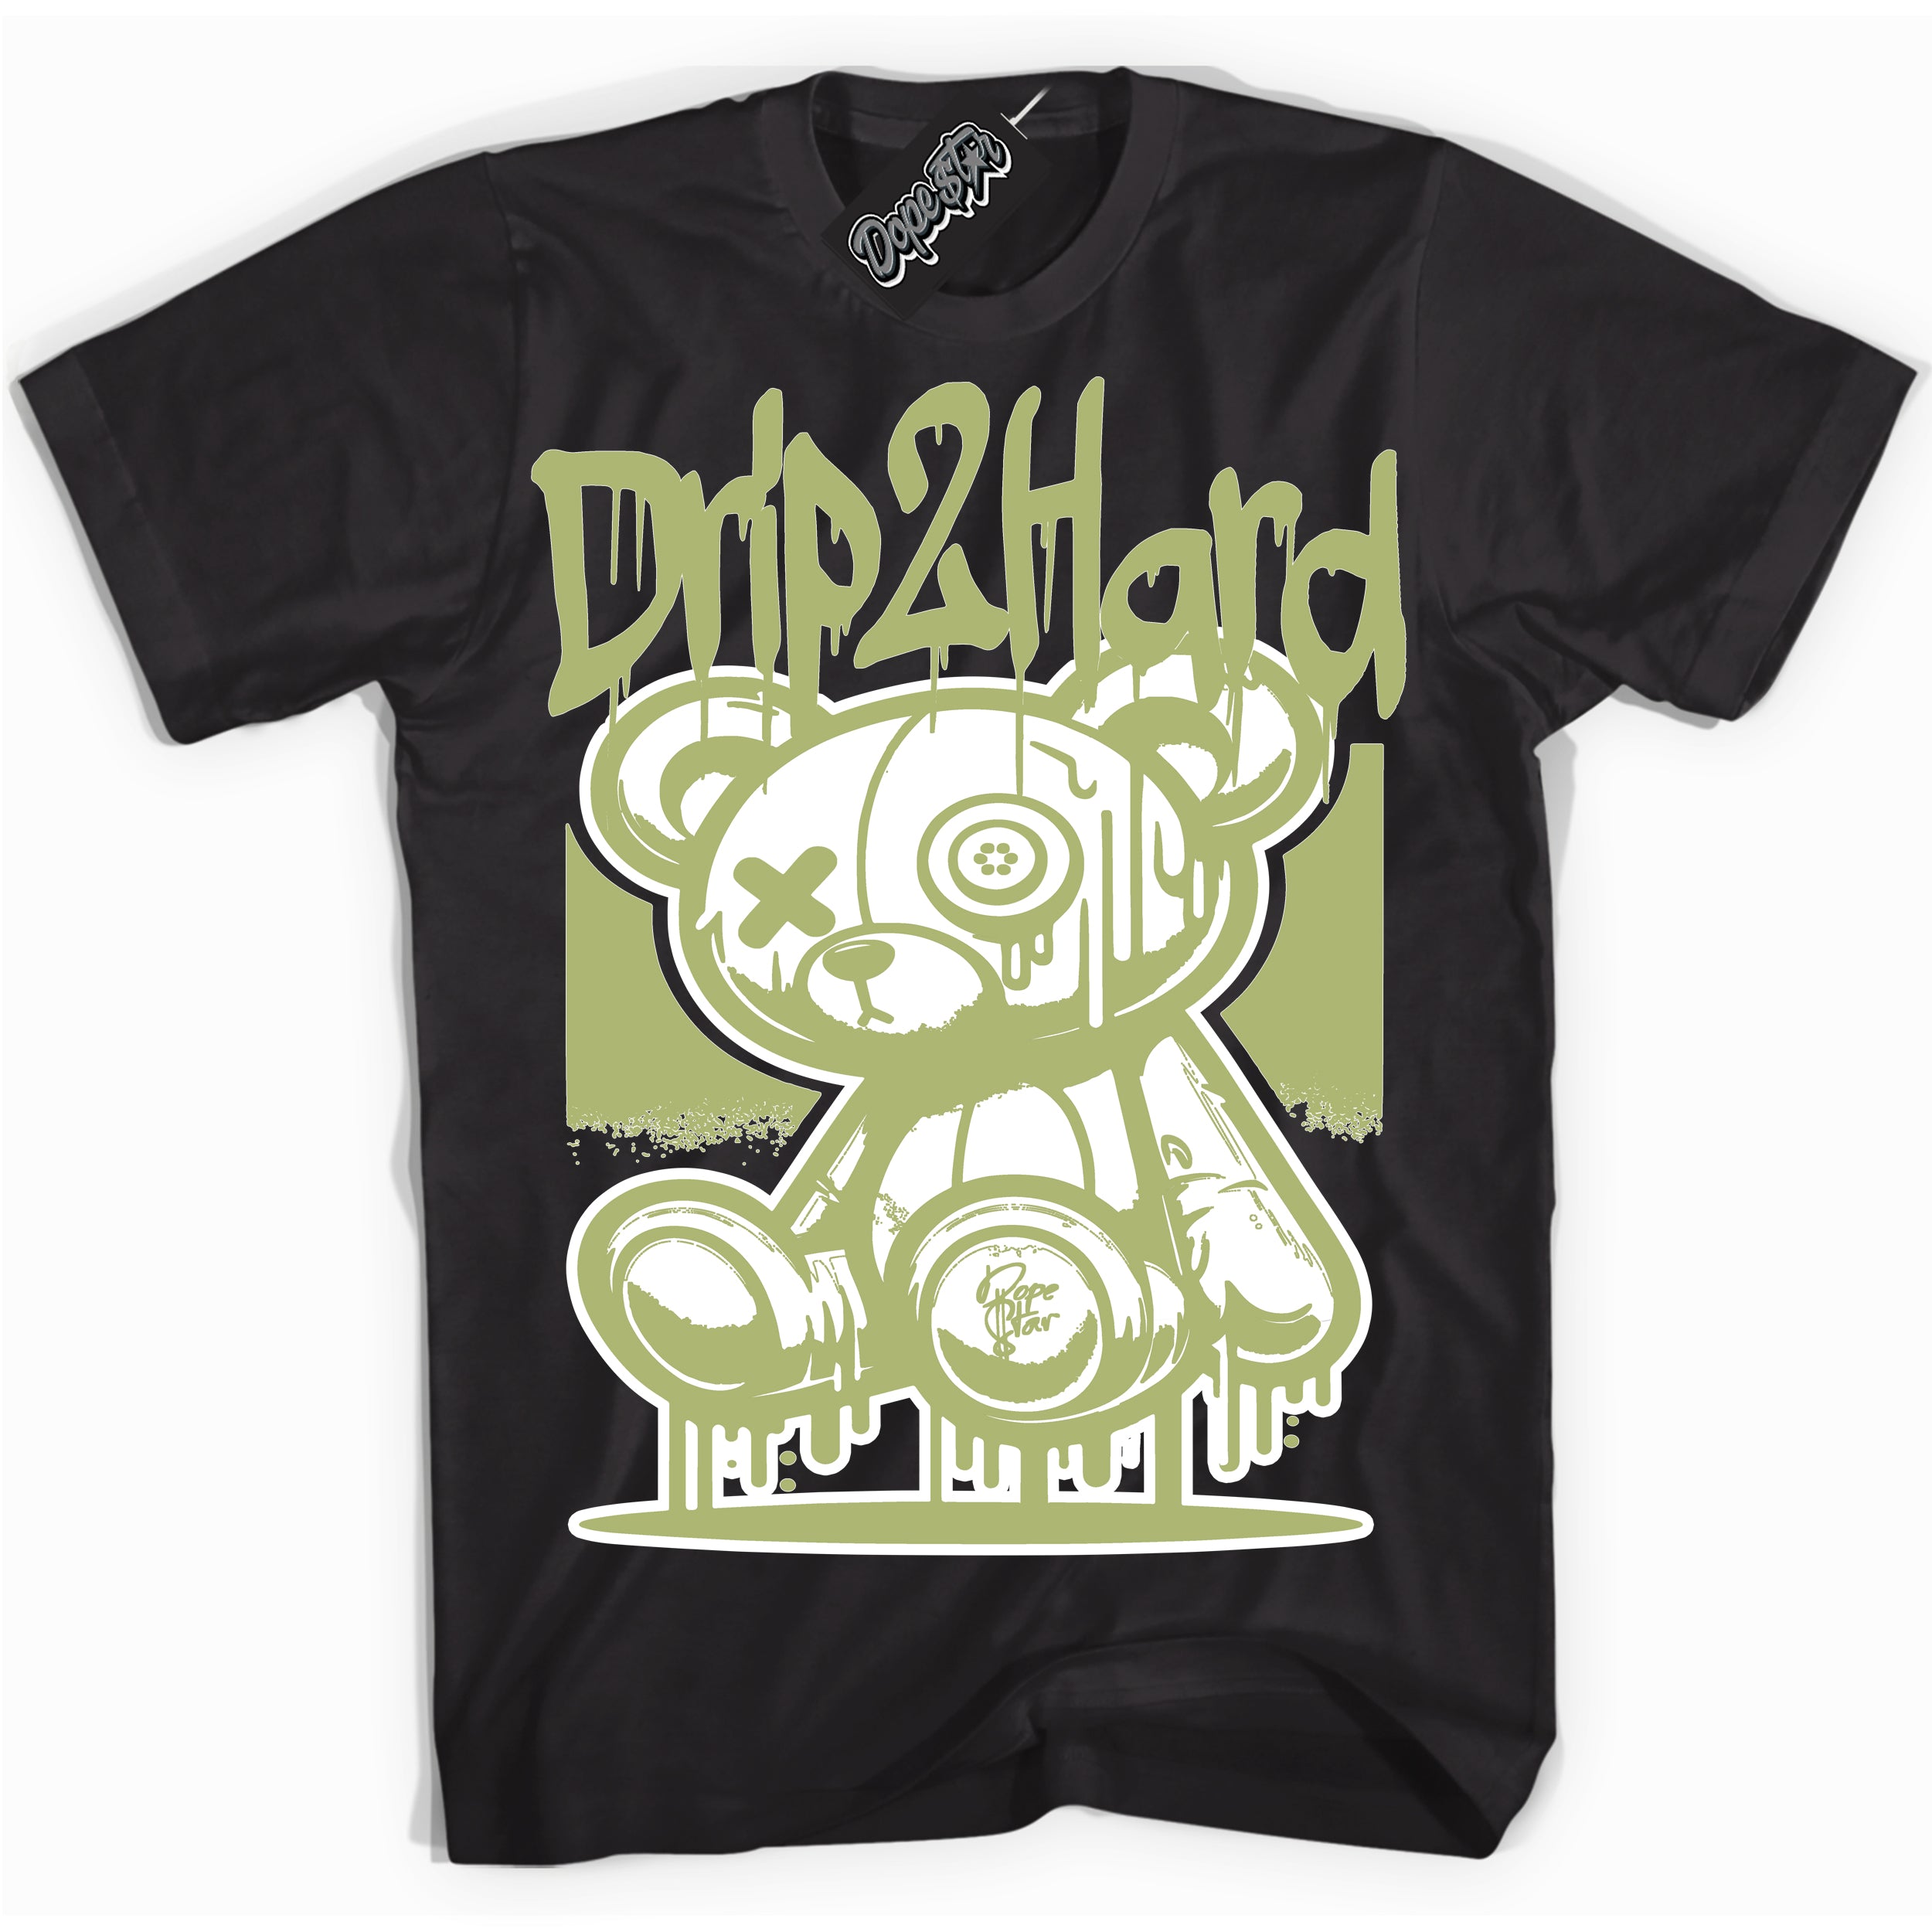 Cool Black graphic tee with “ Drip 2 Hard ” design, that perfectly matches Green Python 1s